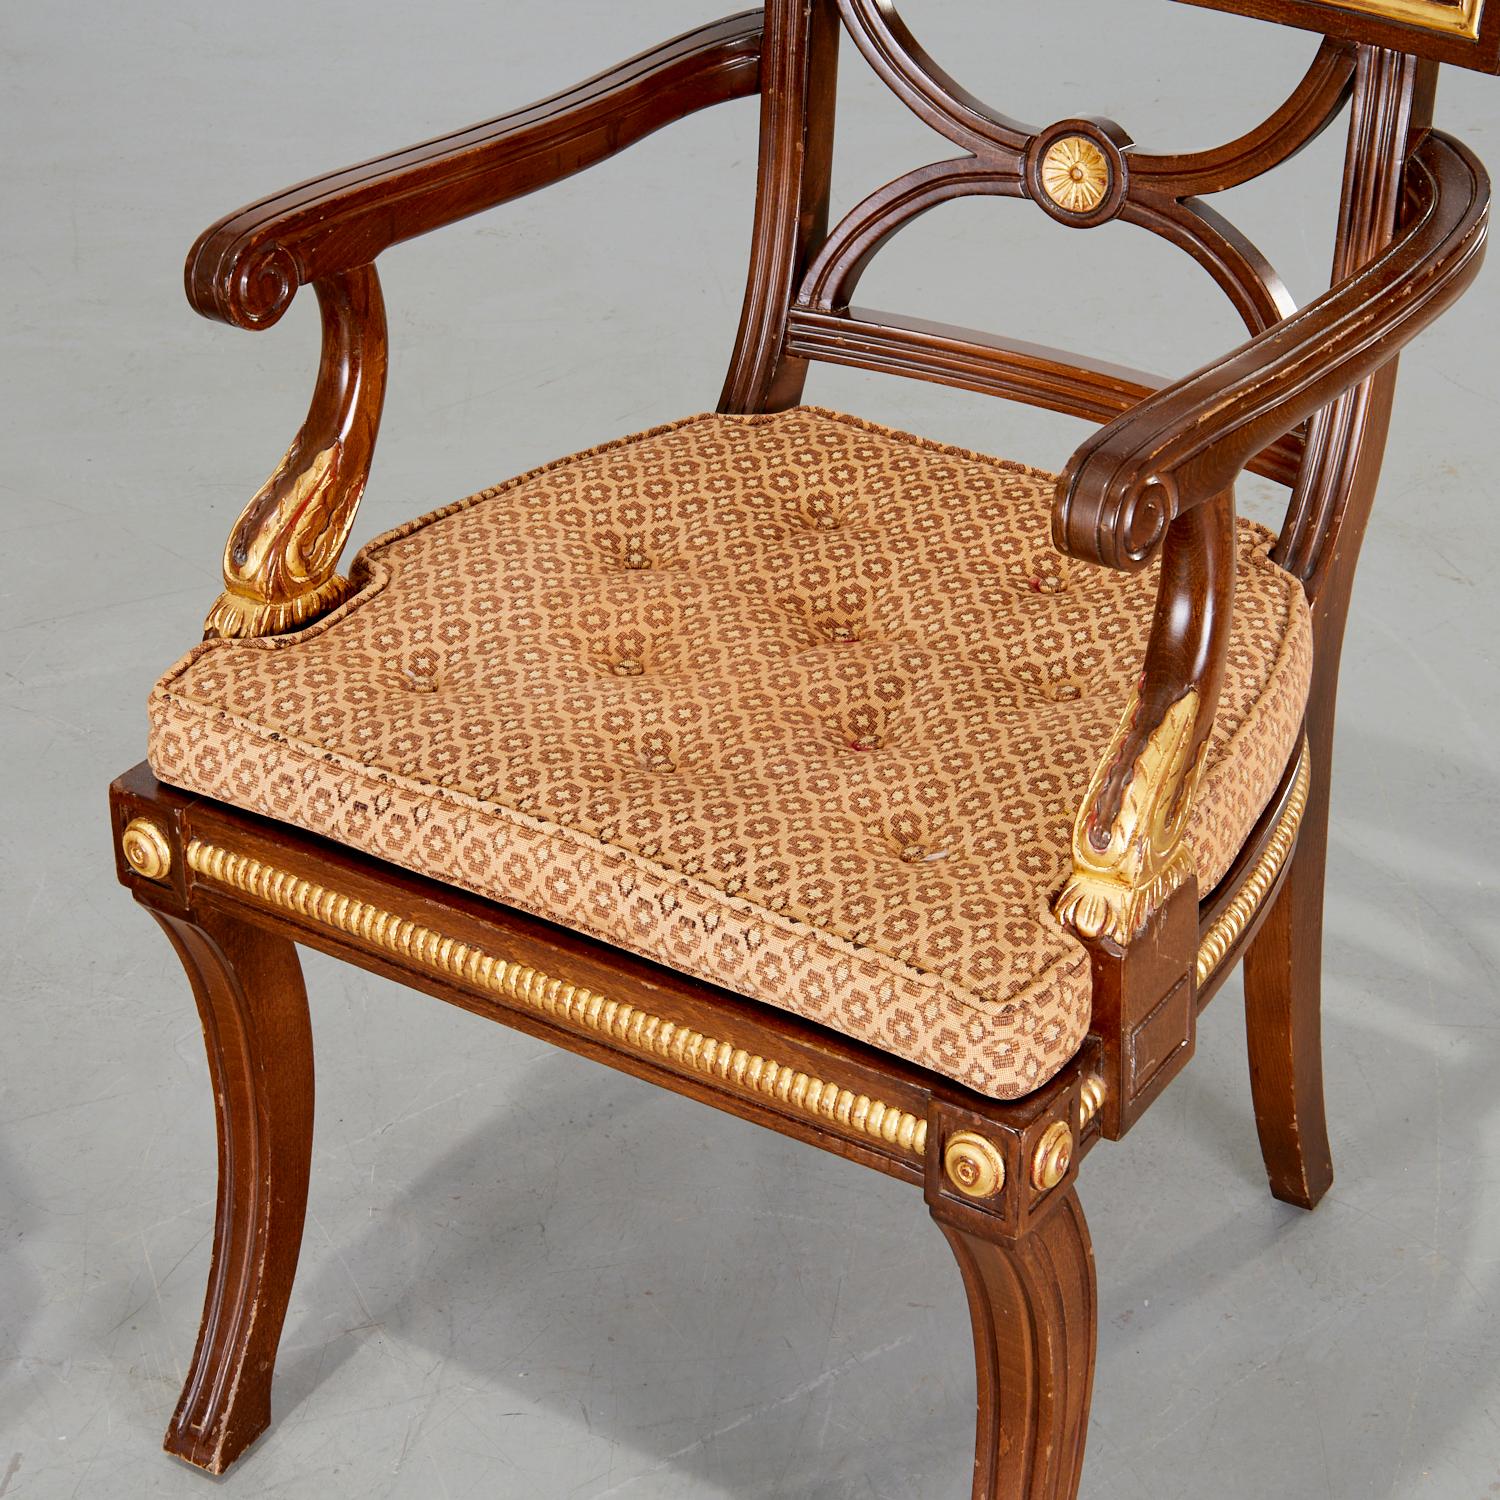 20th c., Regency style armchair, with gilt folate design, medallions and caned seat. The arms terminate in a gold tone folate and carved detail. There is a nice button tufted loose seat cushion. The sabre legs support a caned seat with richly